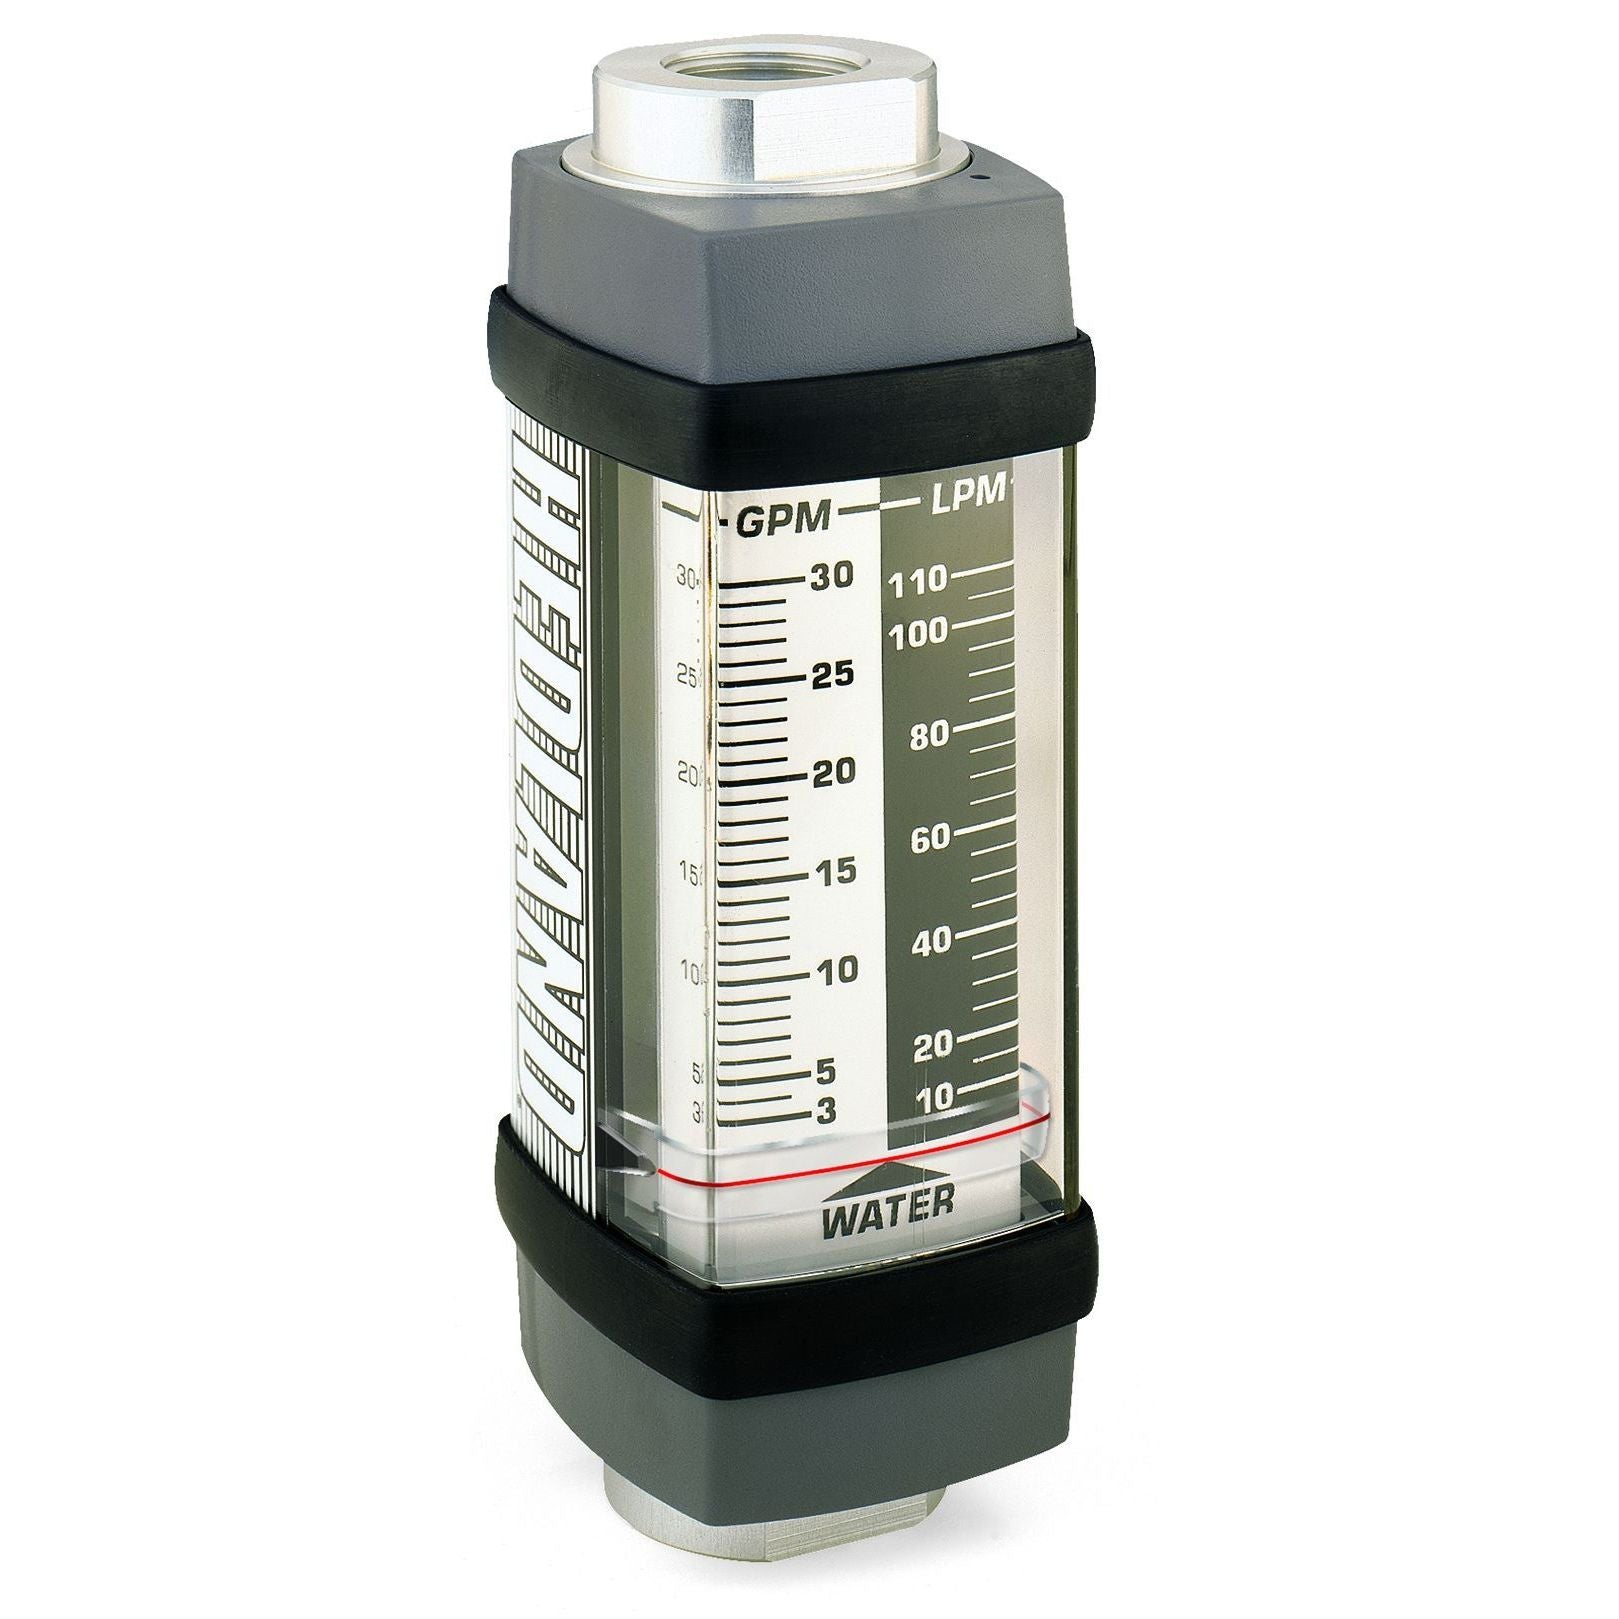 H731X-002 : Hedland 5000psi 316SS Flow Meter for Caustic or Corrosive Liquids, 3/4 NPT, 0.2 to 2.0 GPM